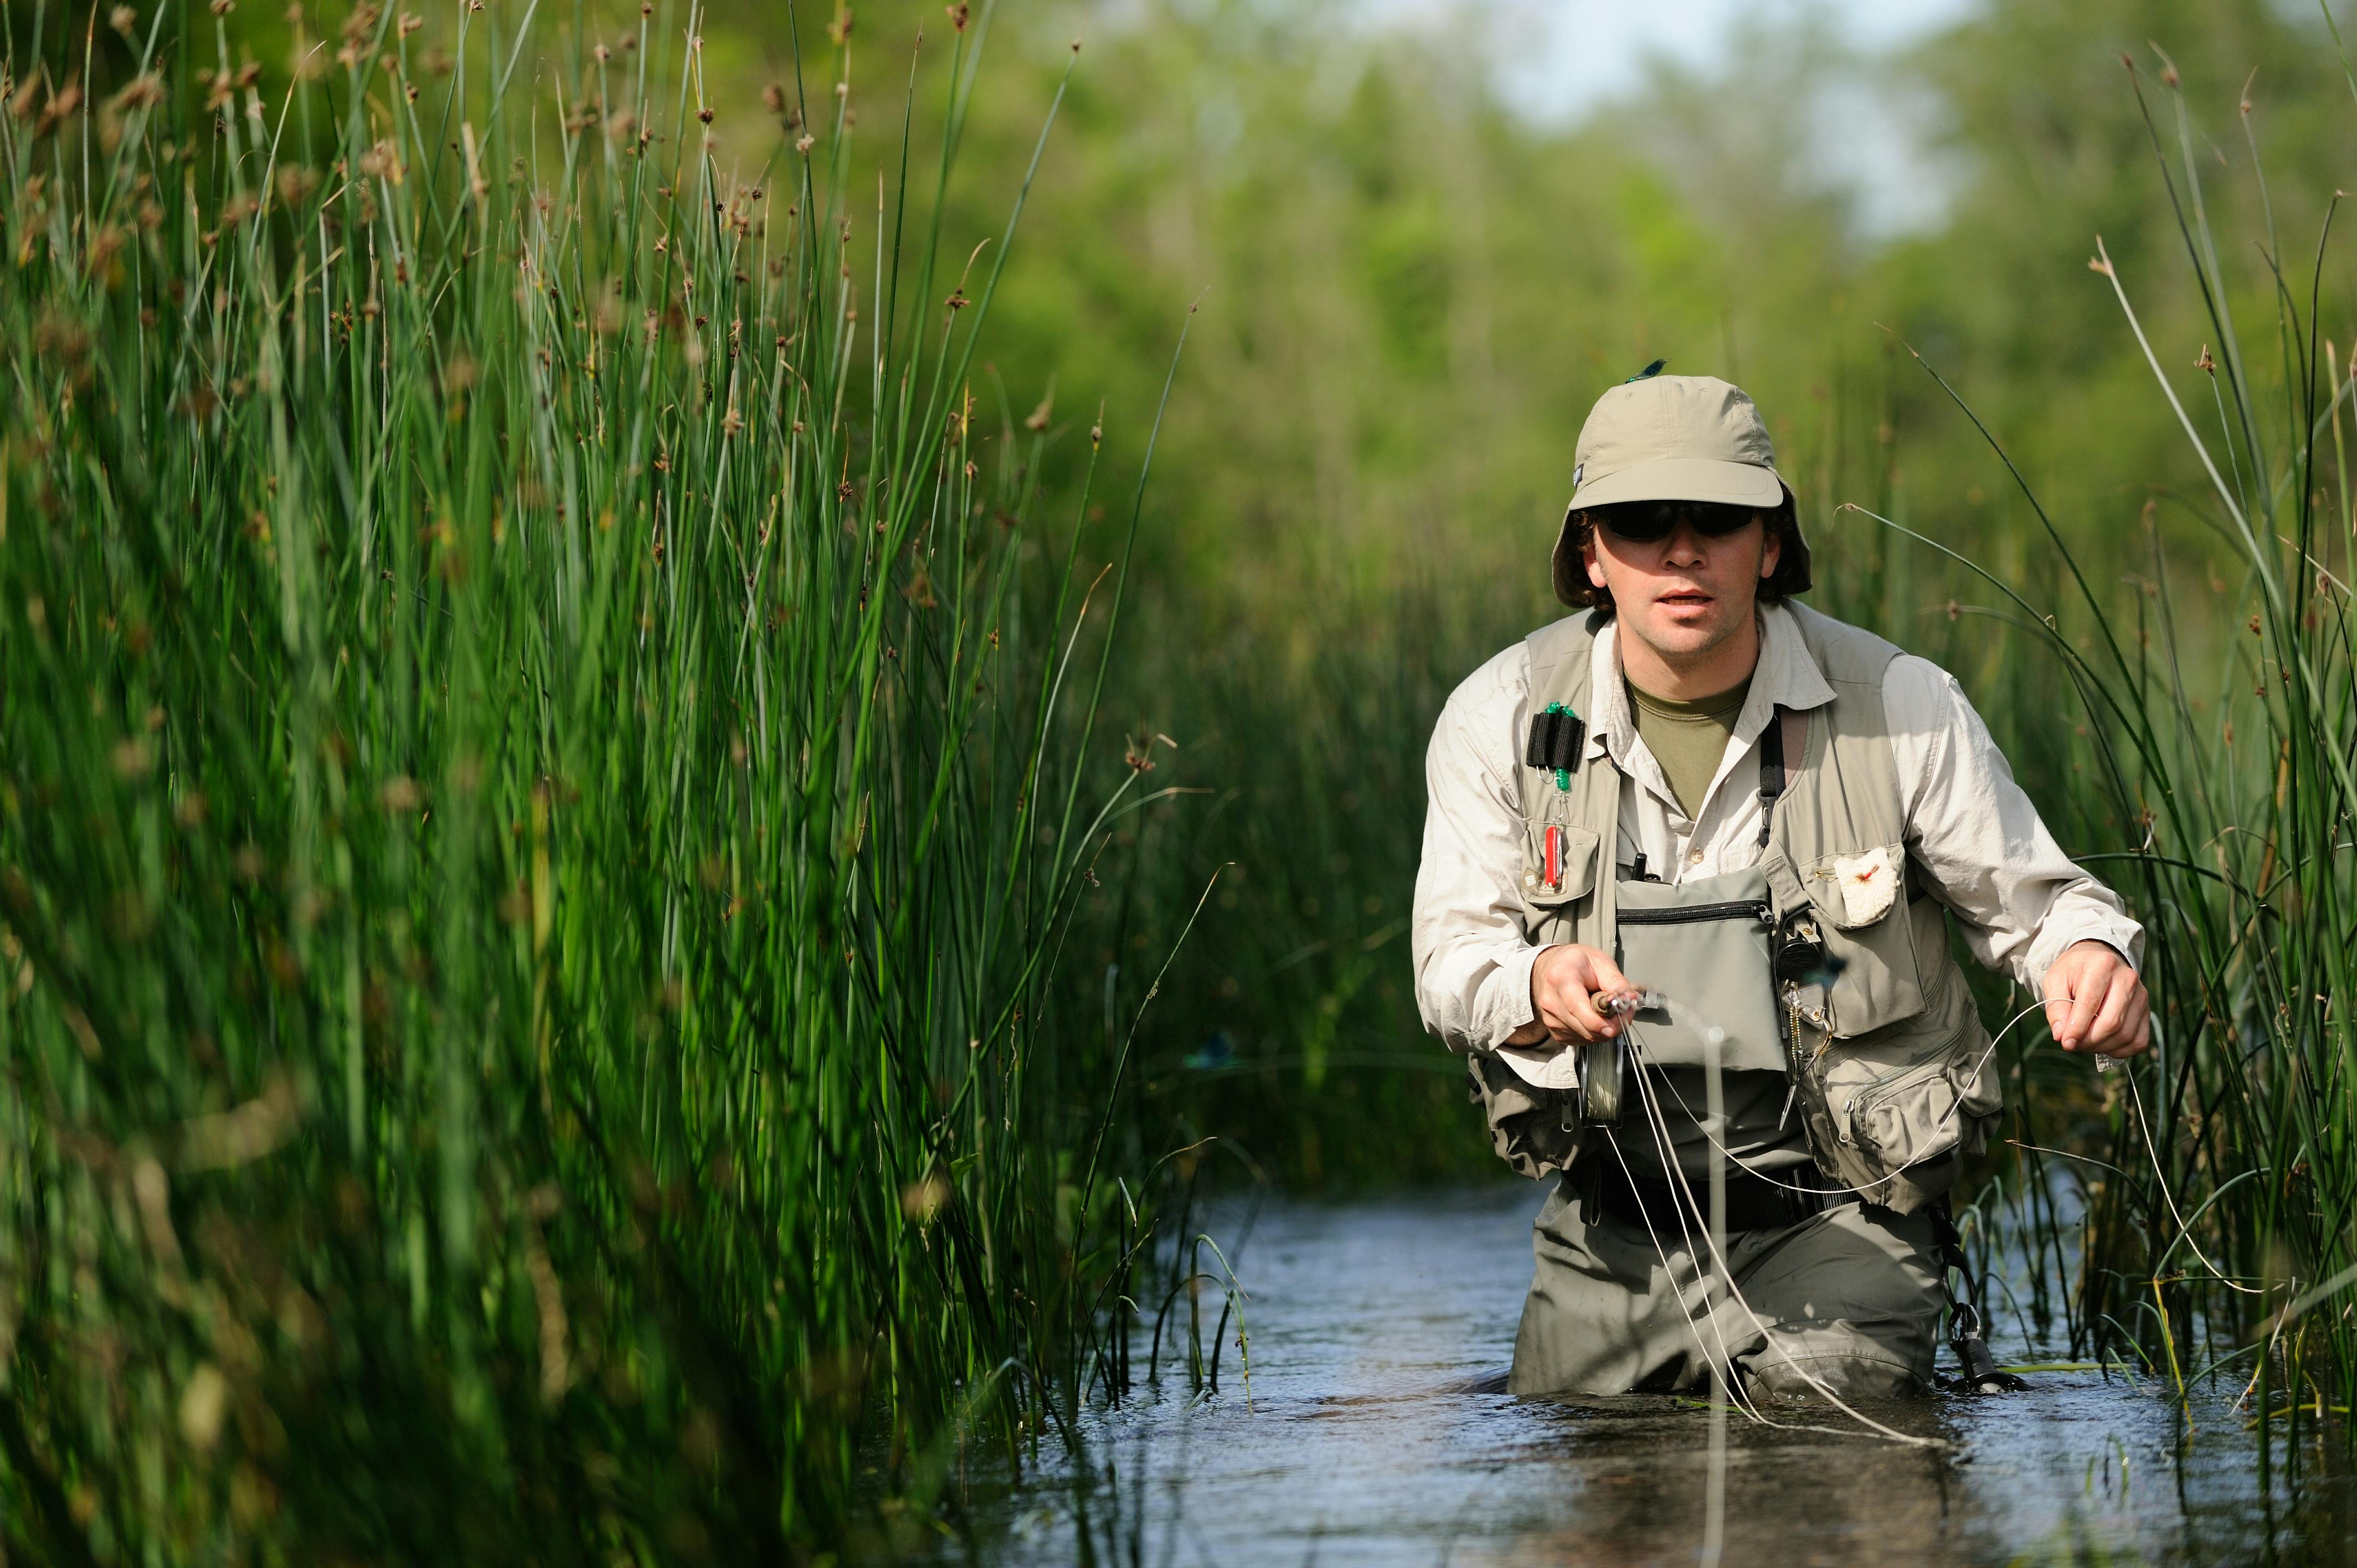 The 11 Best Wader and Fishing Apparel Brands